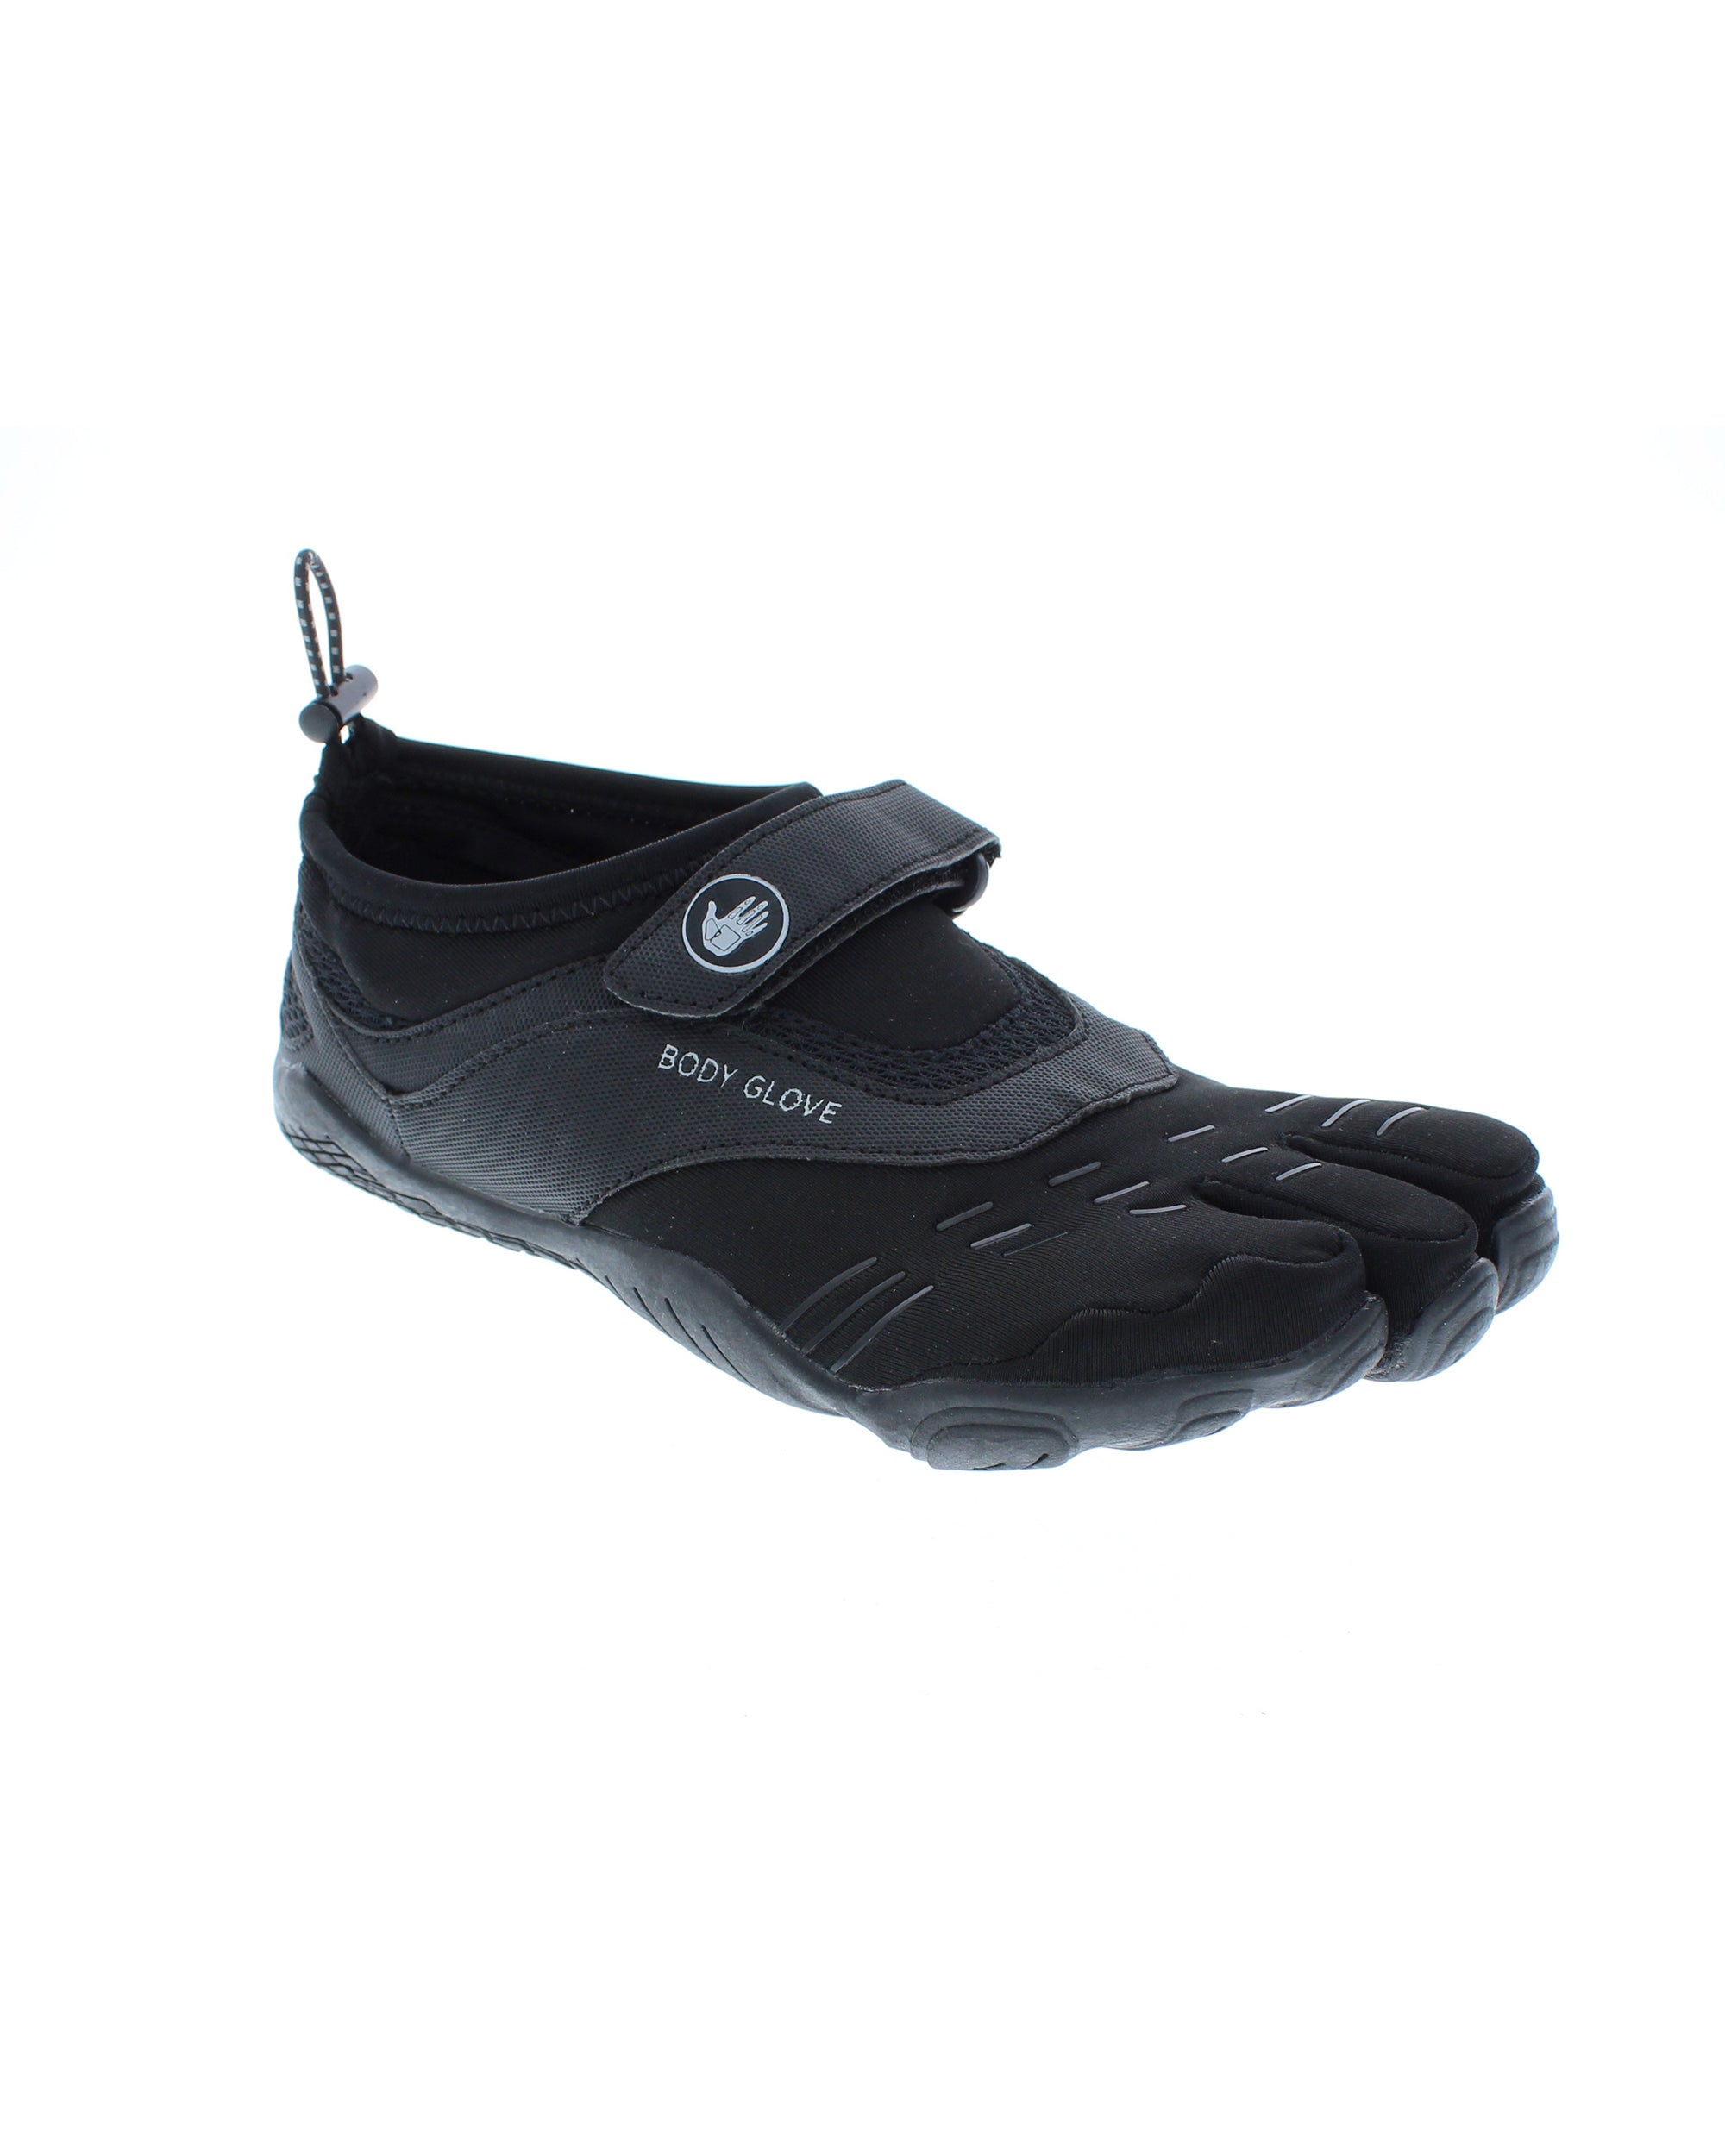 3T Barefoot Max Water Shoes - Black 